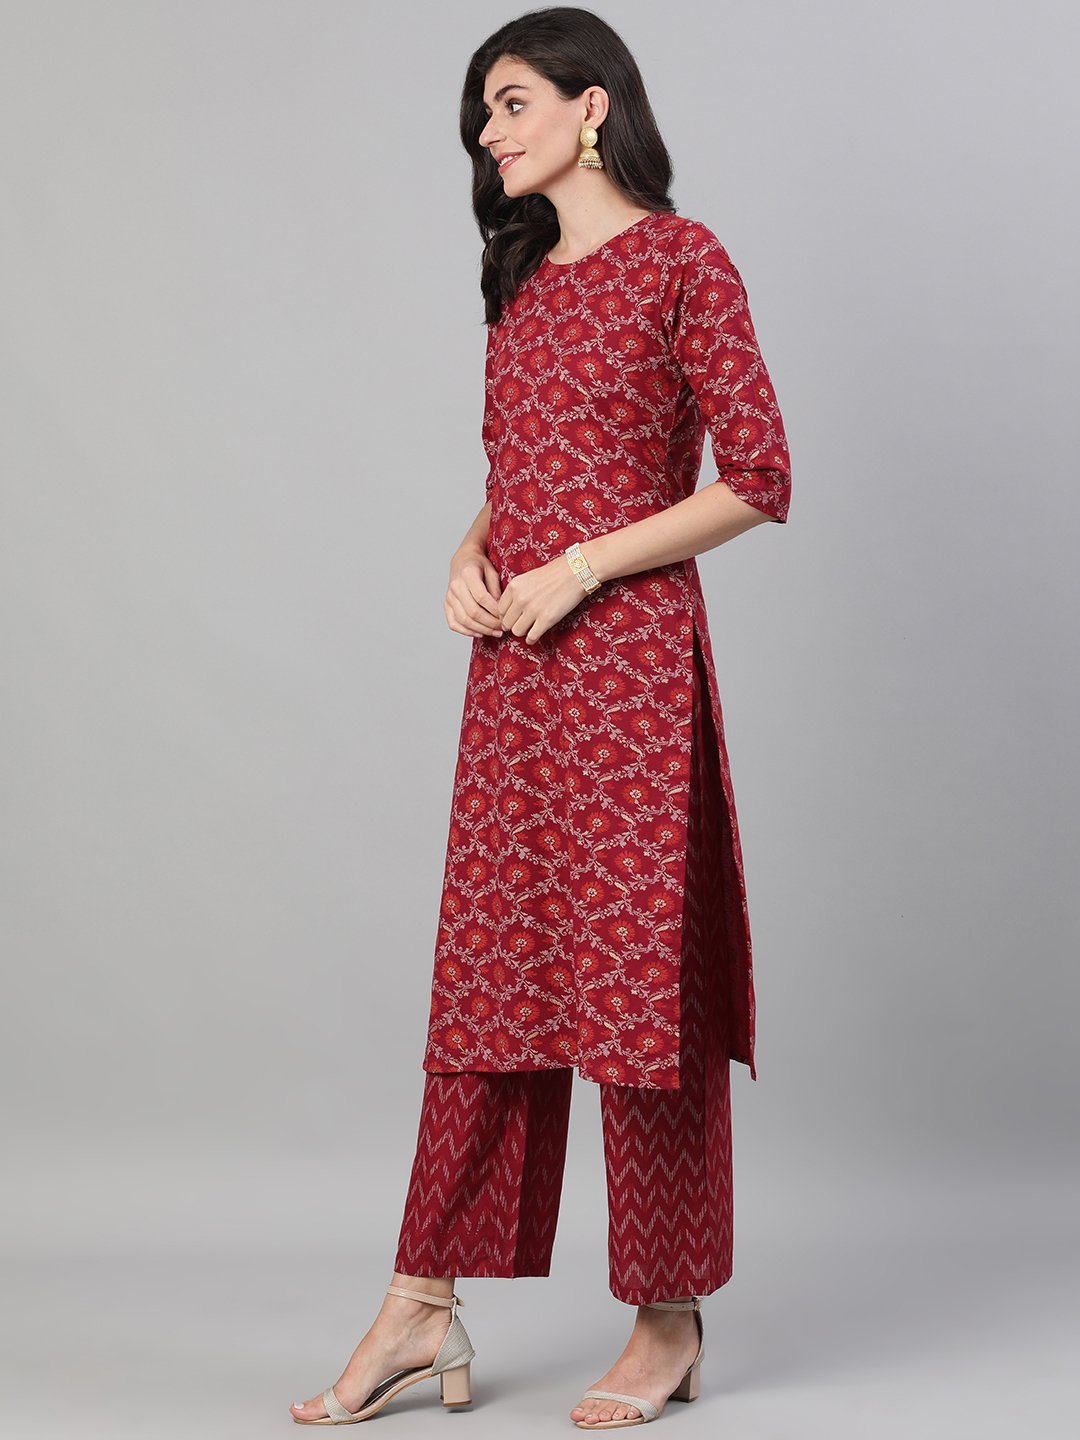 Women's Burgundy Gold Printed Three-Quarter Sleeves Straight Kurta With Palazzo And Dupatta With Pockets And Face Mask - Nayo Clothing